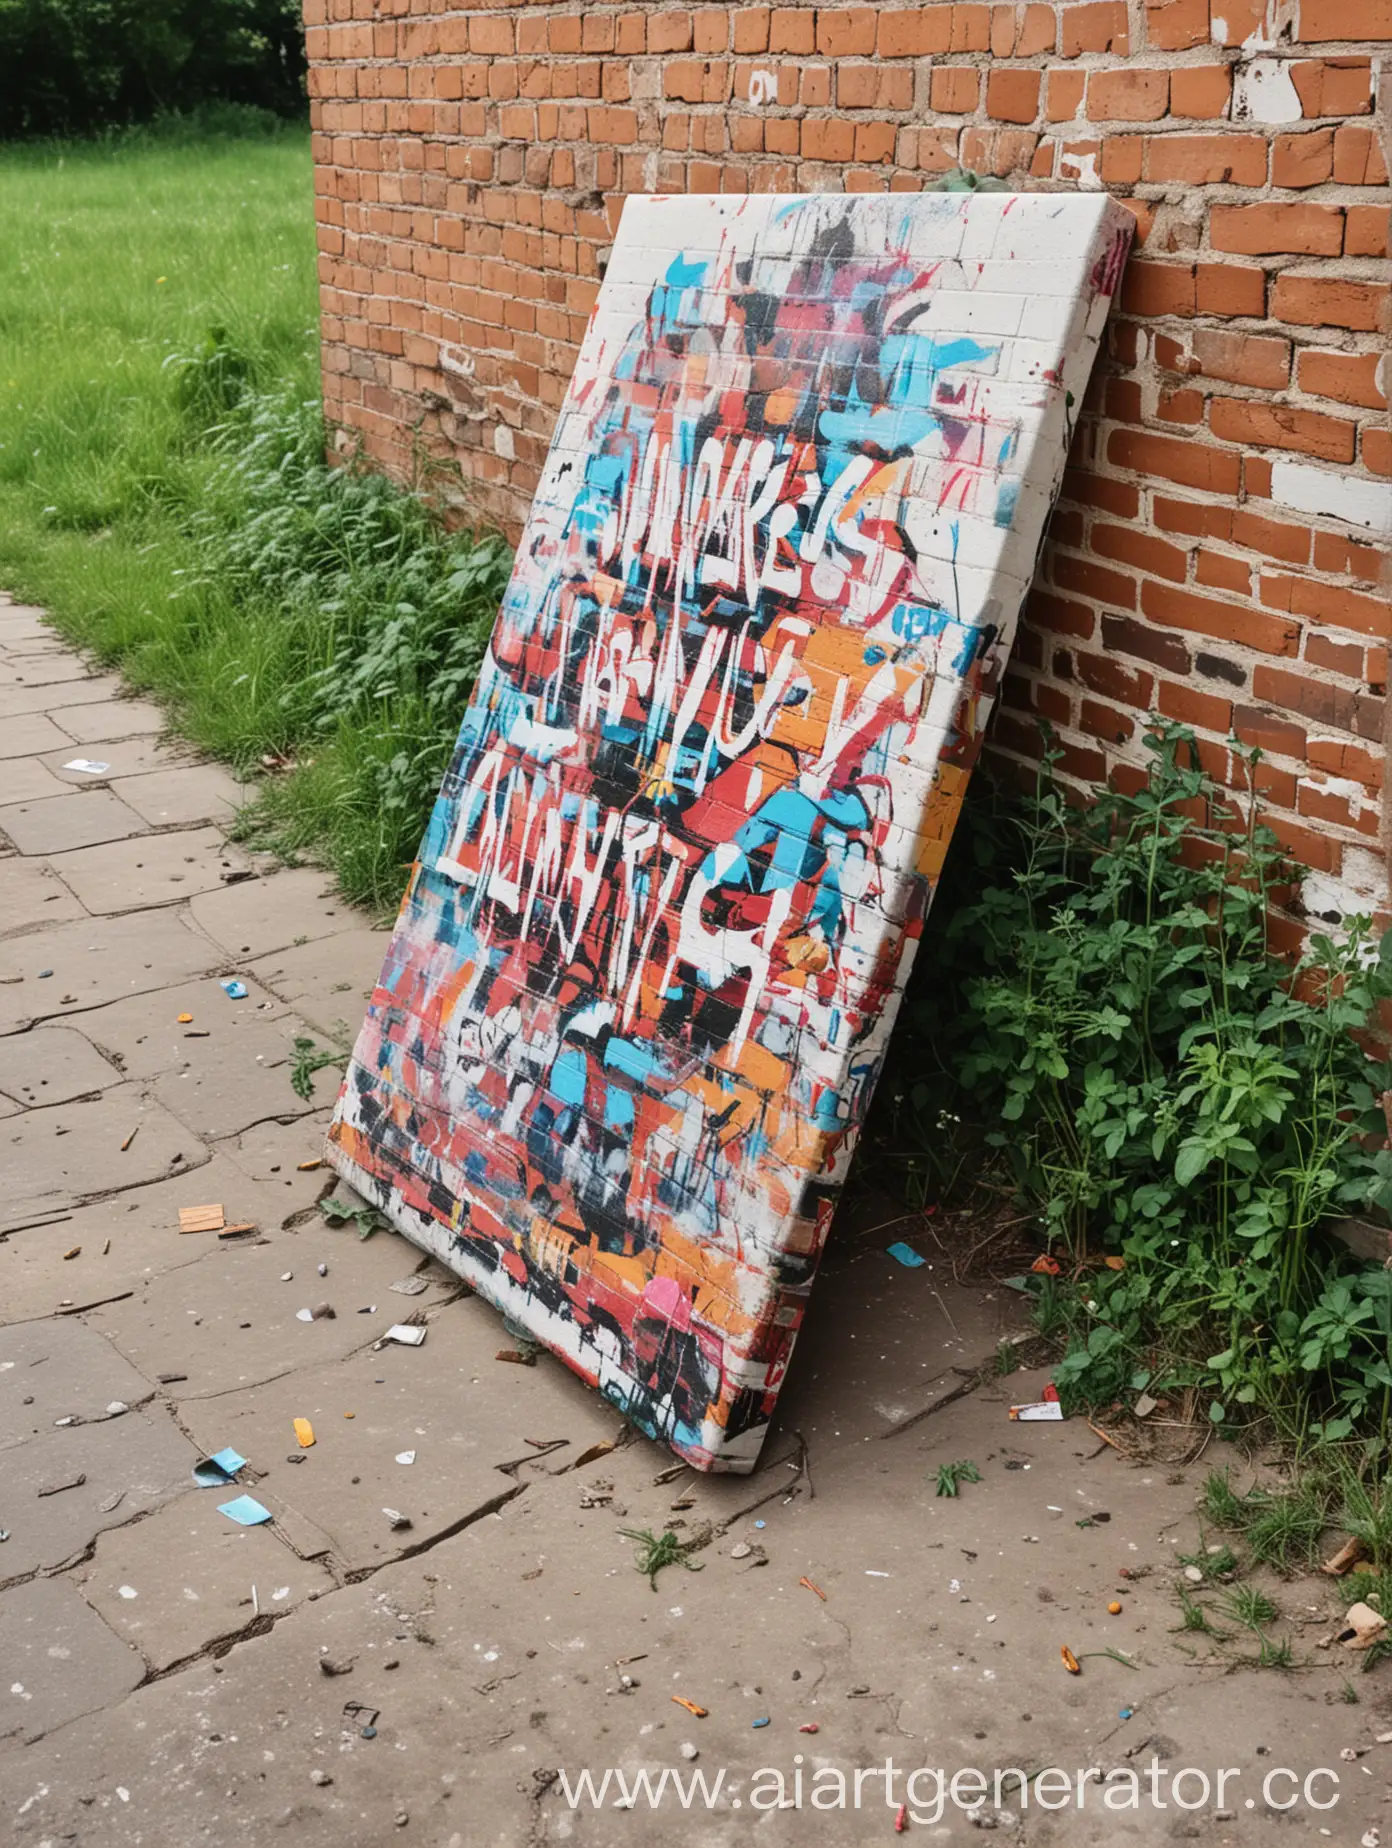 The canvas is on the floor, leaning against a brick wall covered with graffiti in the park